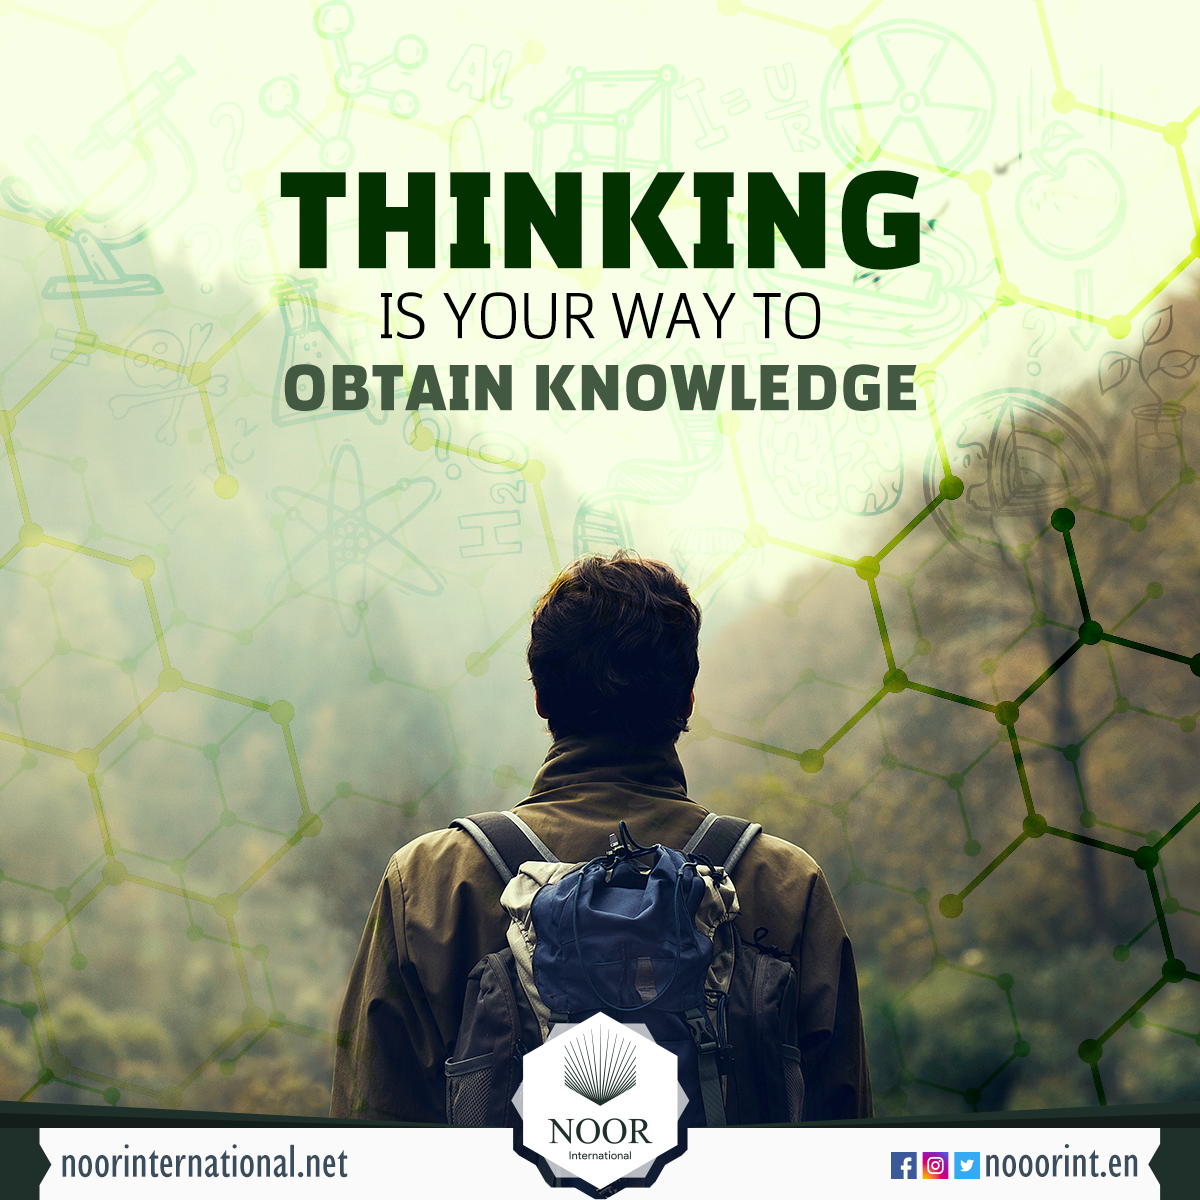 Thinking ... is your way to obtain knowledge